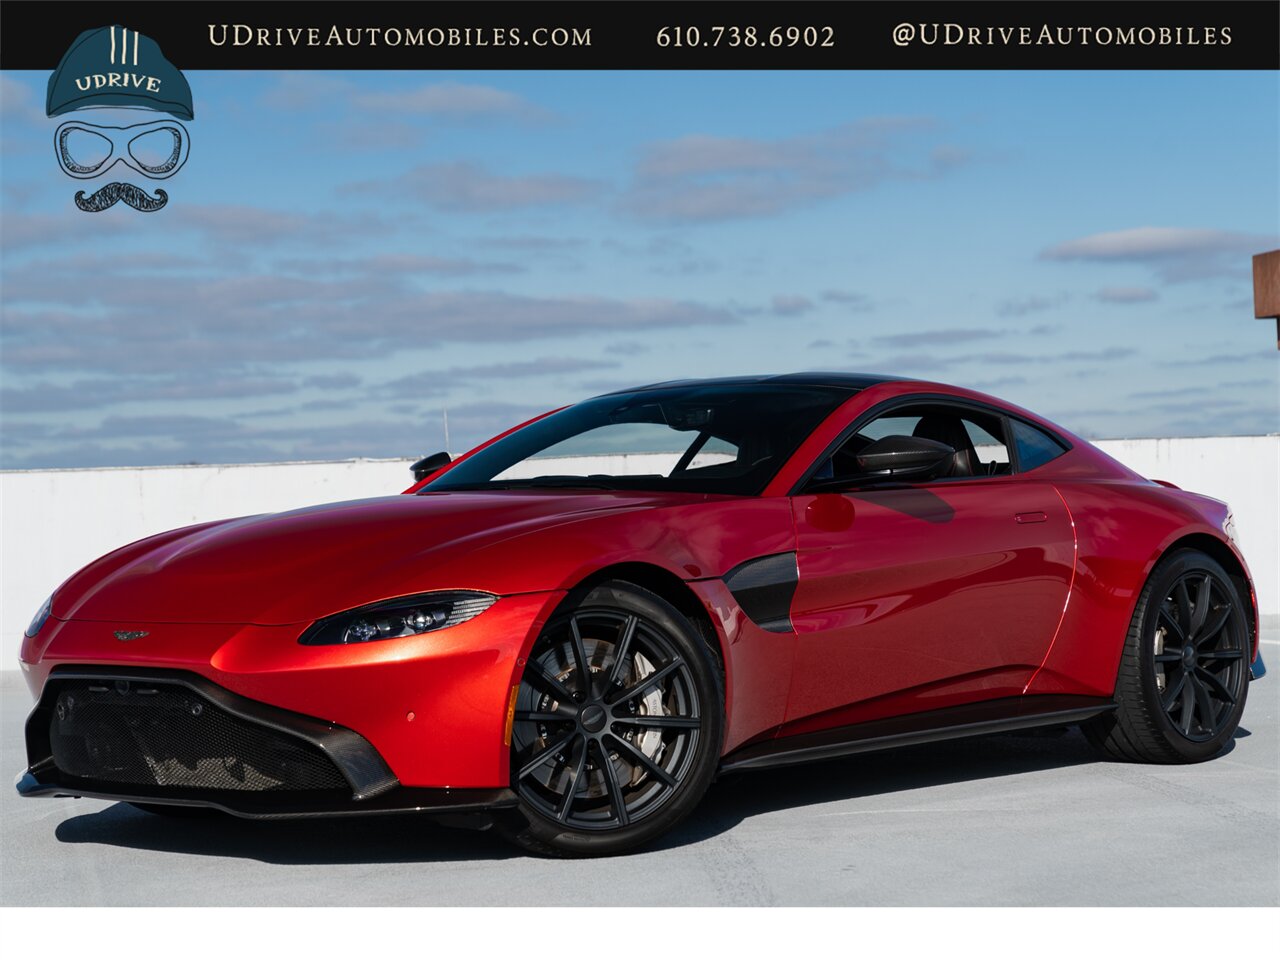 2019 Aston Martin Vantage  Incredibly Spec Rare Q Exclusive Fiamma Red $222k MSRP 1 of a Kind CPO - Photo 1 - West Chester, PA 19382